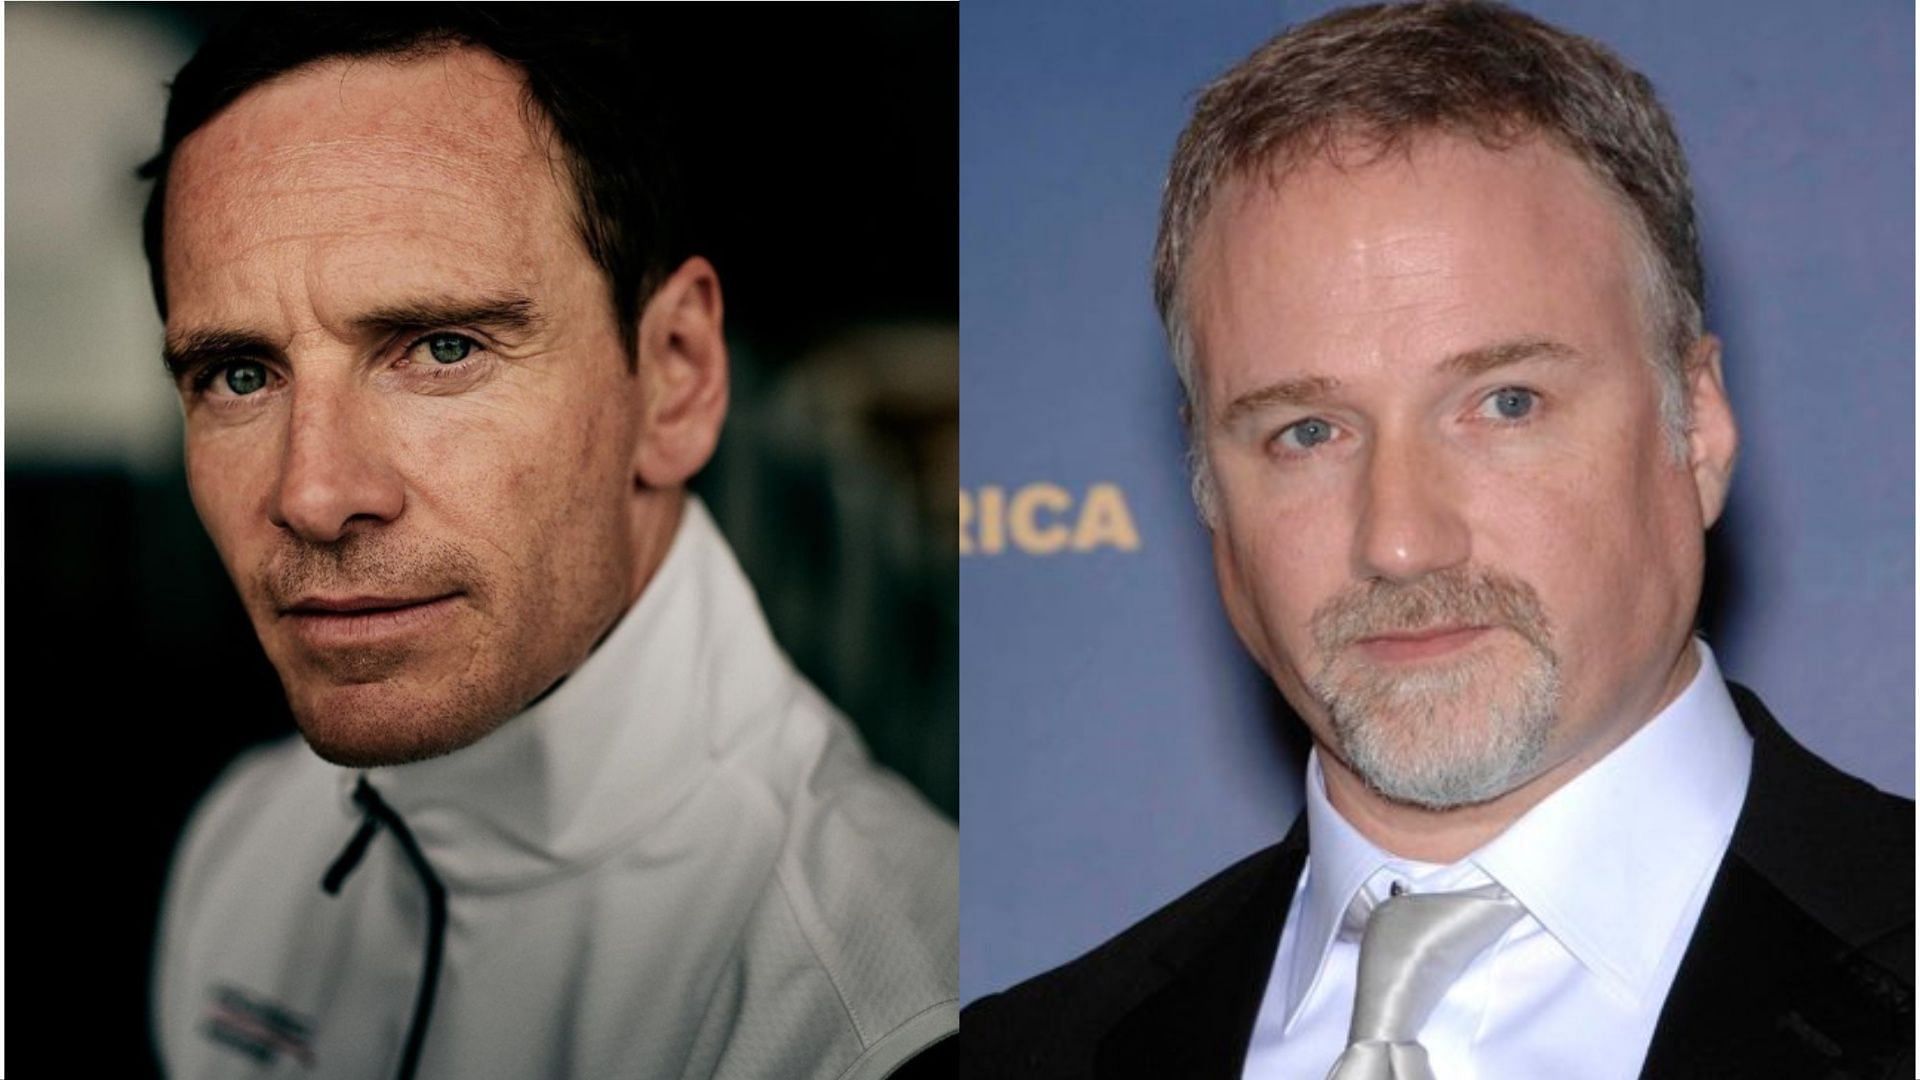 Michael Fassbender plays the role of an assasin in David Fincher